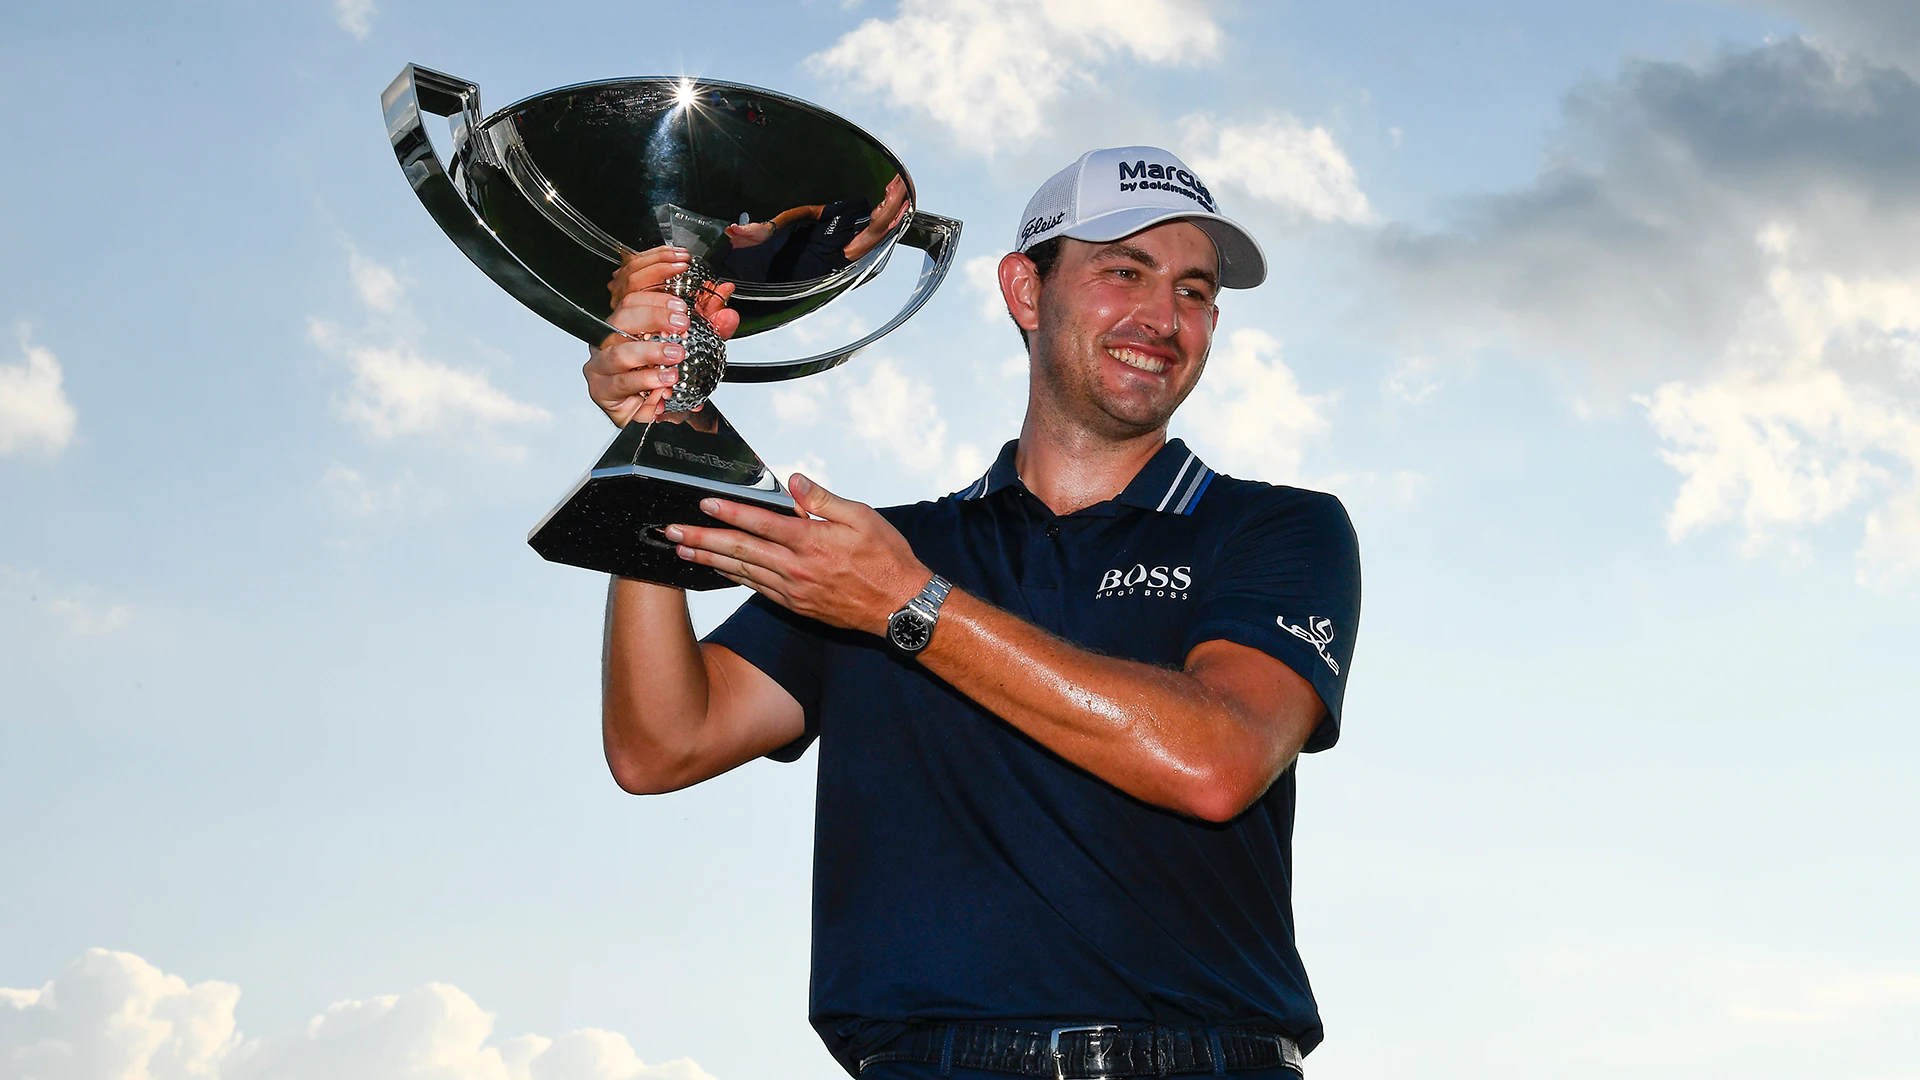 Patrick Cantlay wins PGA Tour Player of the Year over Jon Rahm